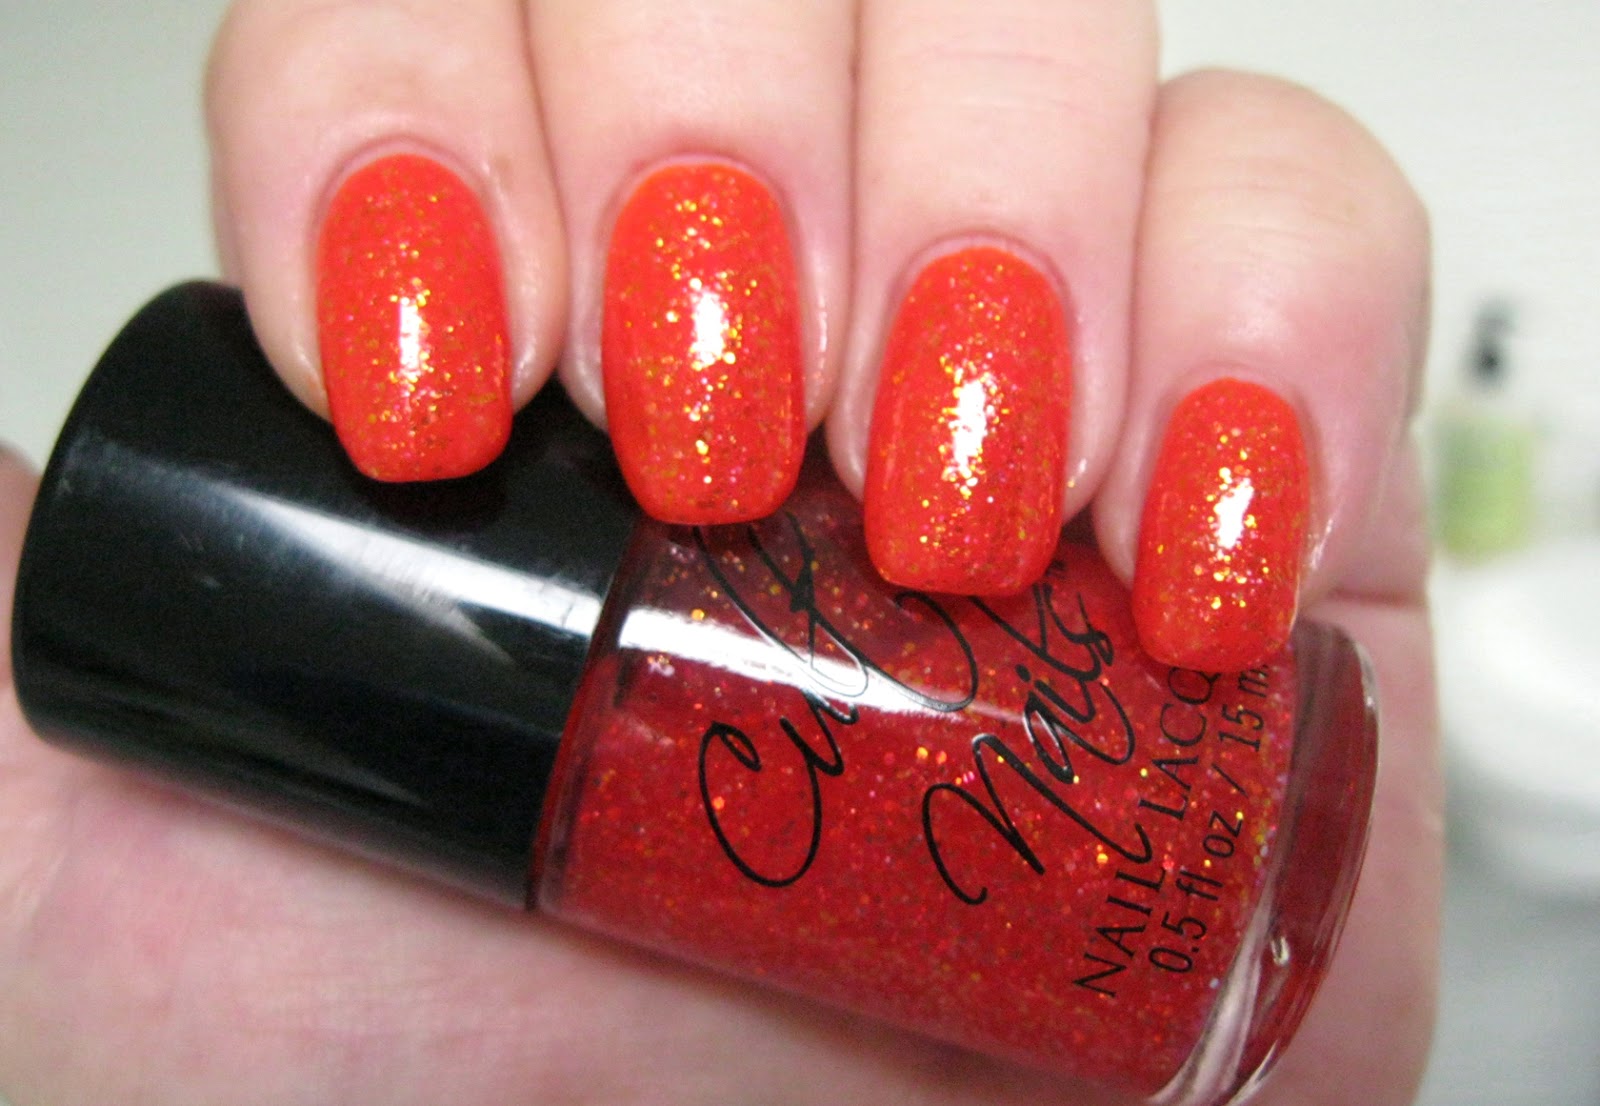 10. Orly Nail Lacquer in "Orange Punch" - wide 7